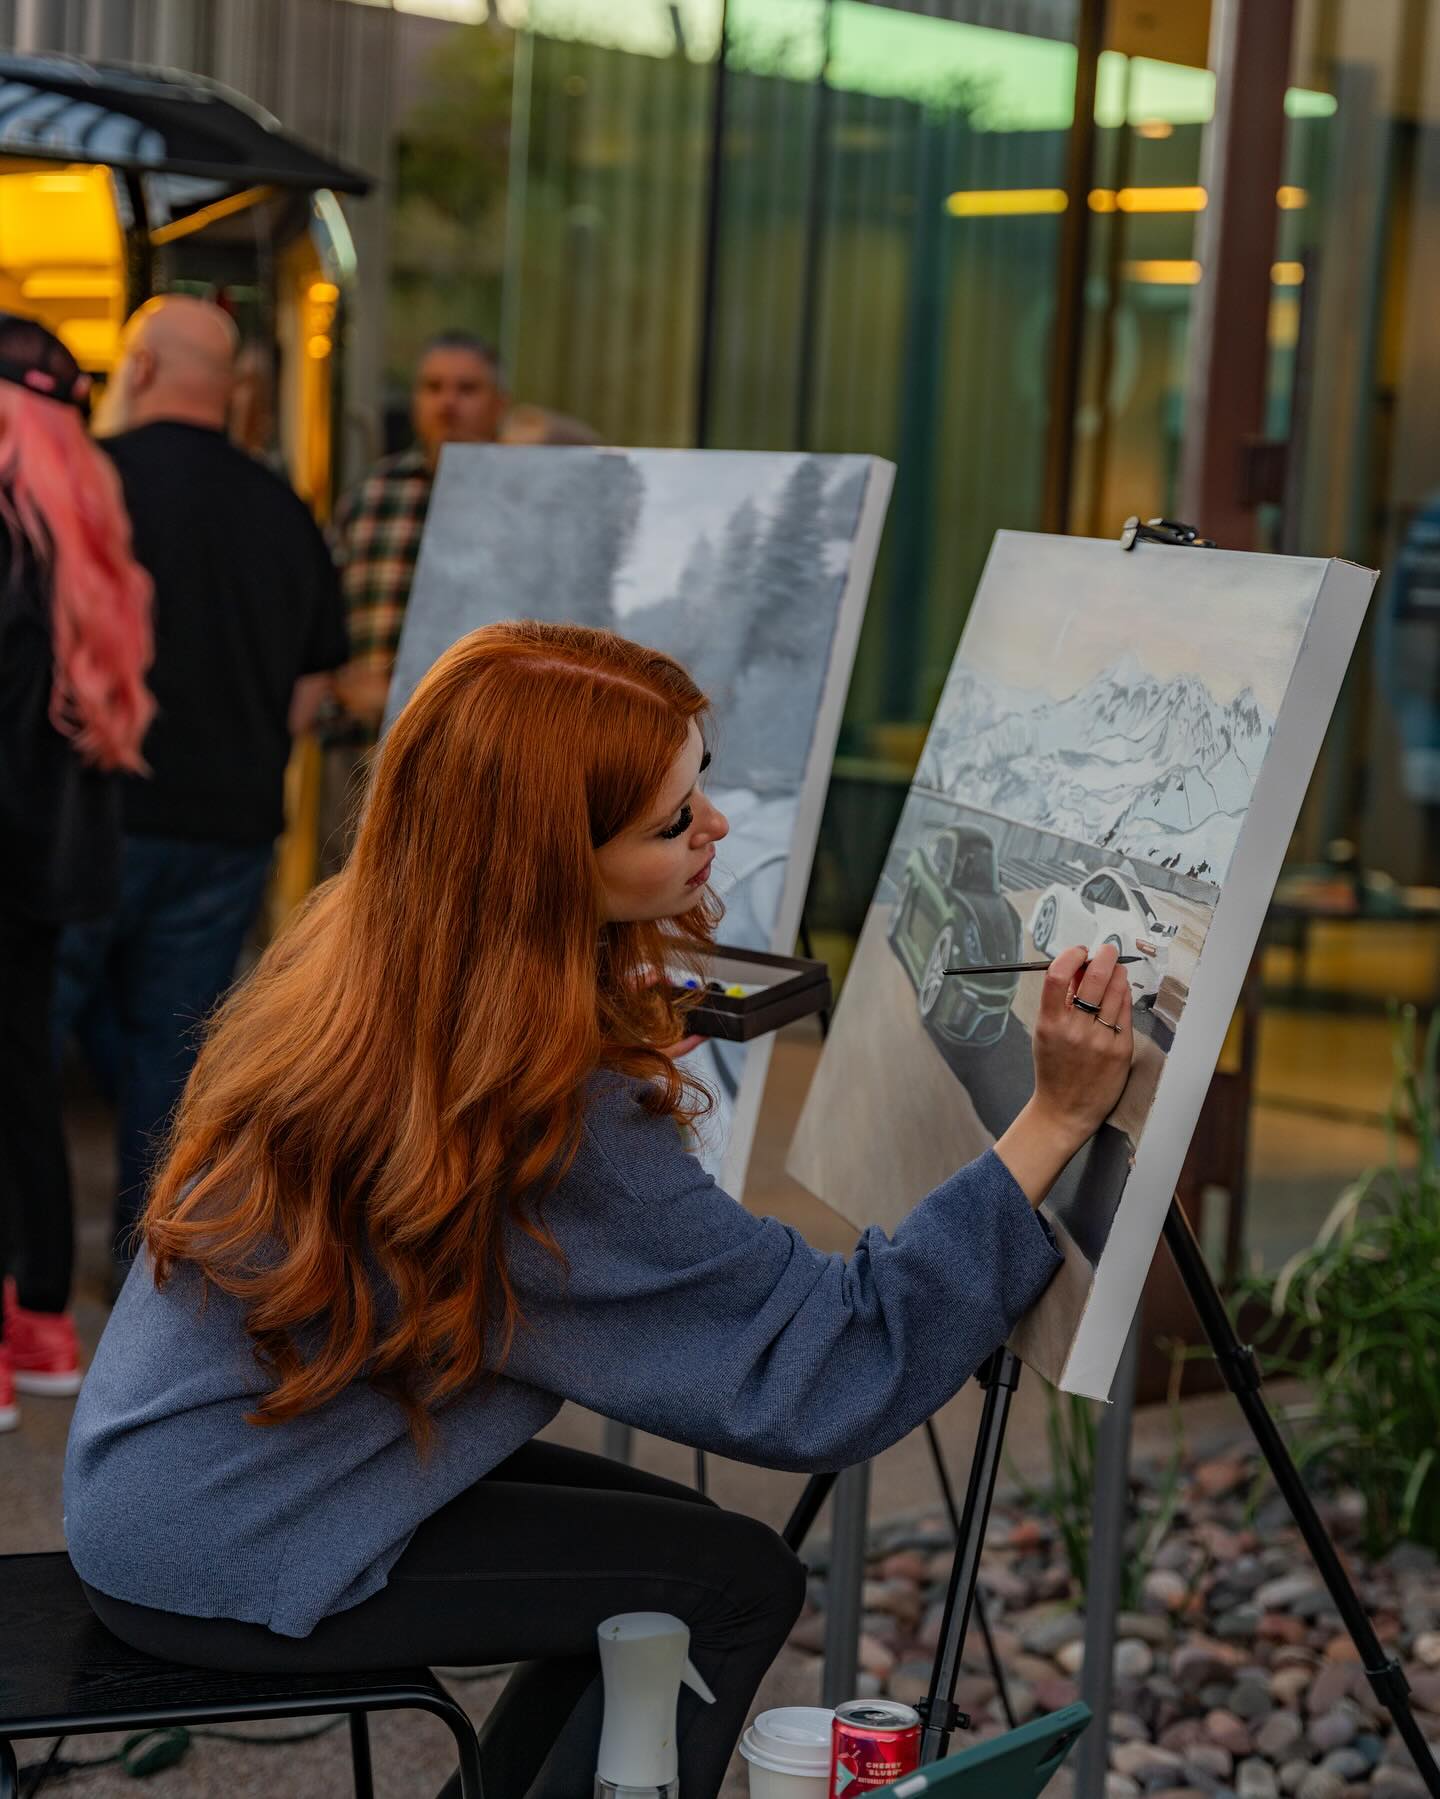 Some spectacular photos of me doing what I do best at @ottocarclub yesterday! They had the hospitality to allow me to paint in the midst of fantastic cars, people, and music, which I am eternally grateful for.

Photos by the lovely @automotive_alex who not only saved me all week with her fantastic “yellow M taxi,” but is also kind enough to photograph me from a perspective that I’ll never see on my own!

#ottocarclub #livepaintings #automotiveartist #porschemoment #porscheartwork #carpainting